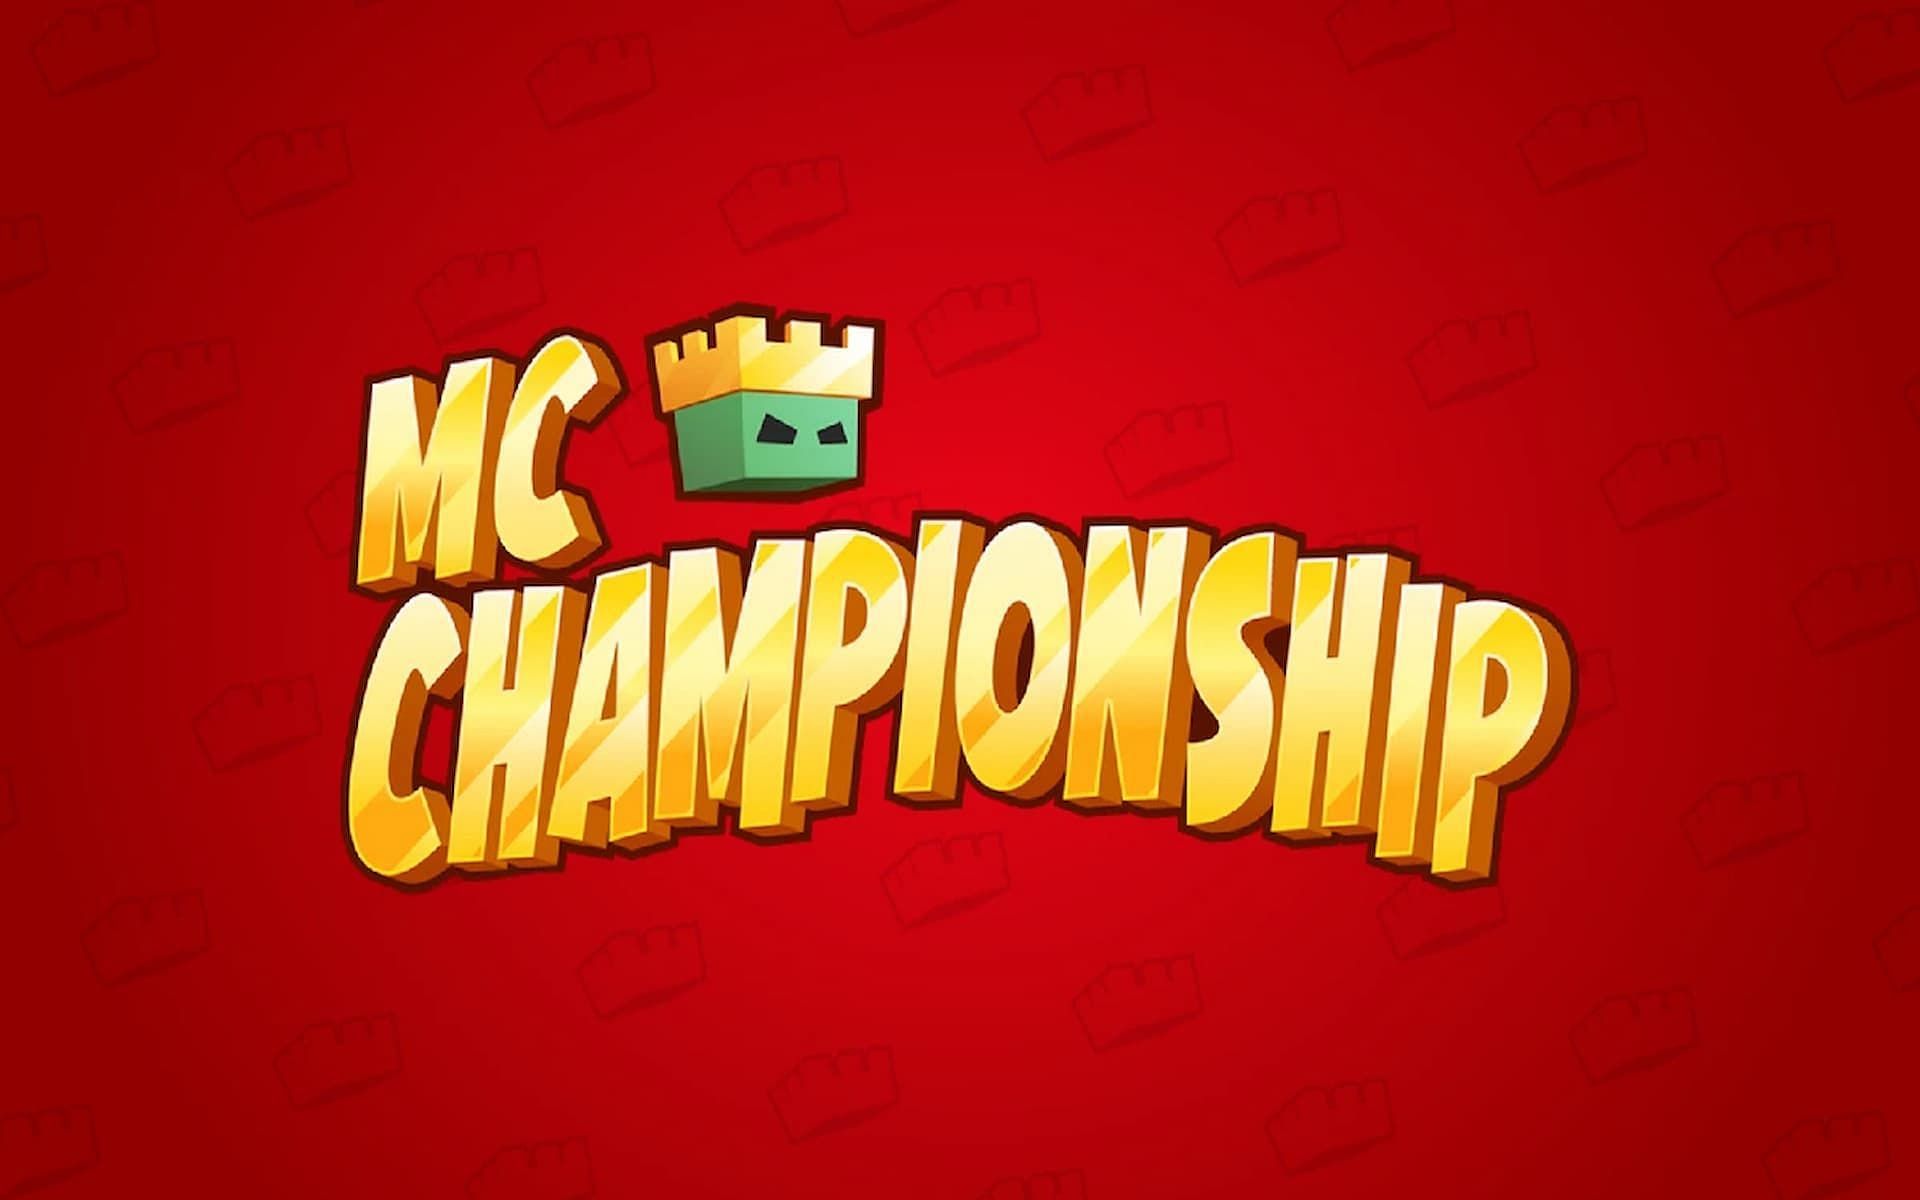 There are many exciting teams for the upcoming Minecraft Championship Party (Image via mcchampionship.fandom.com)